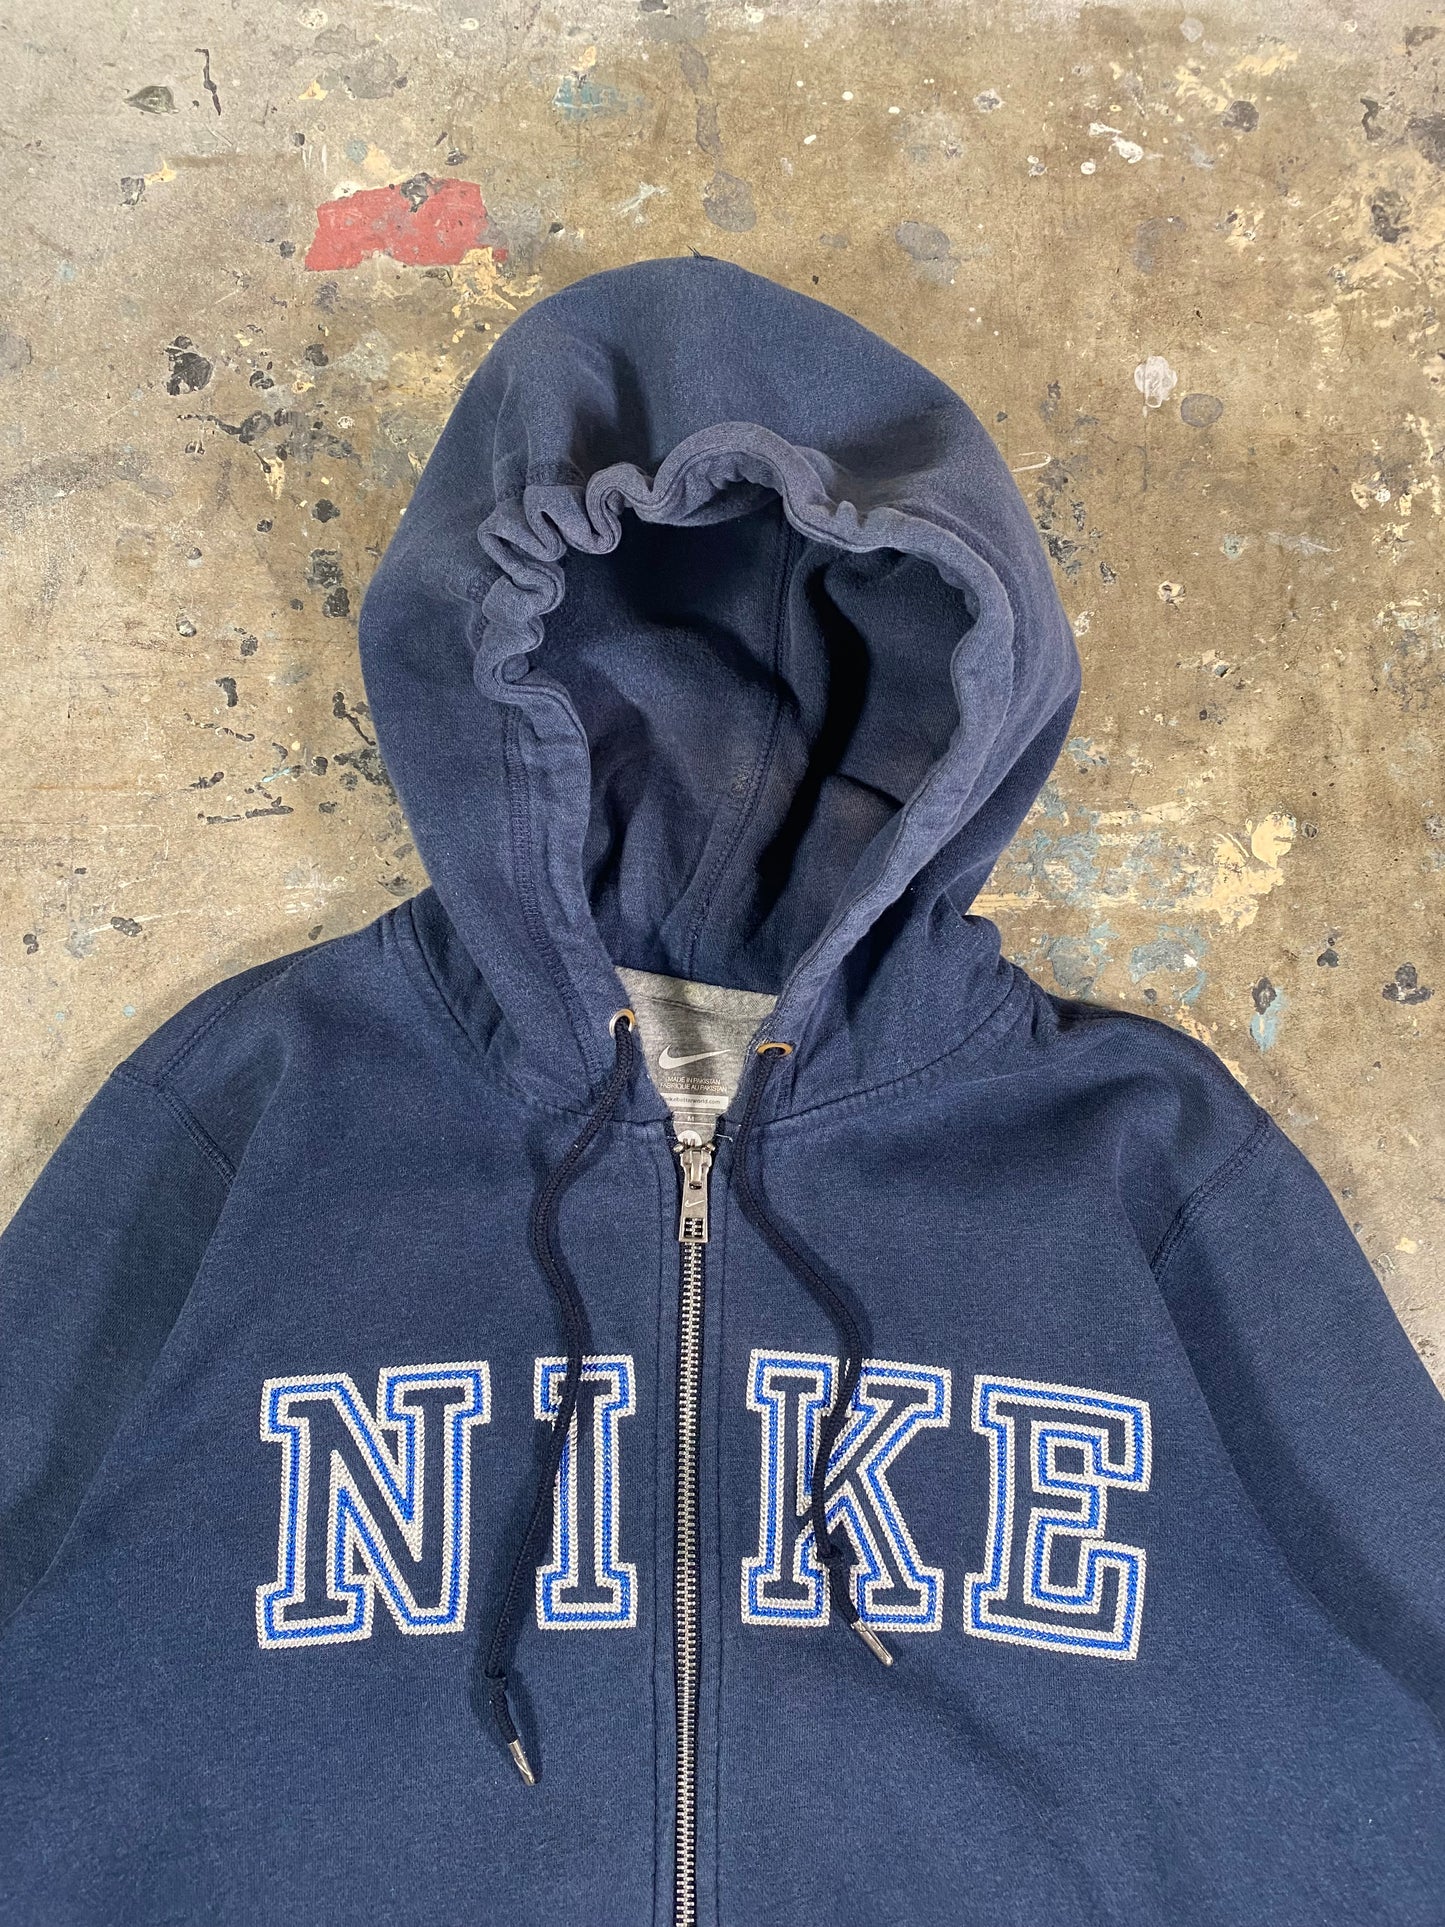 Nike Spell Out Hoodie (M)